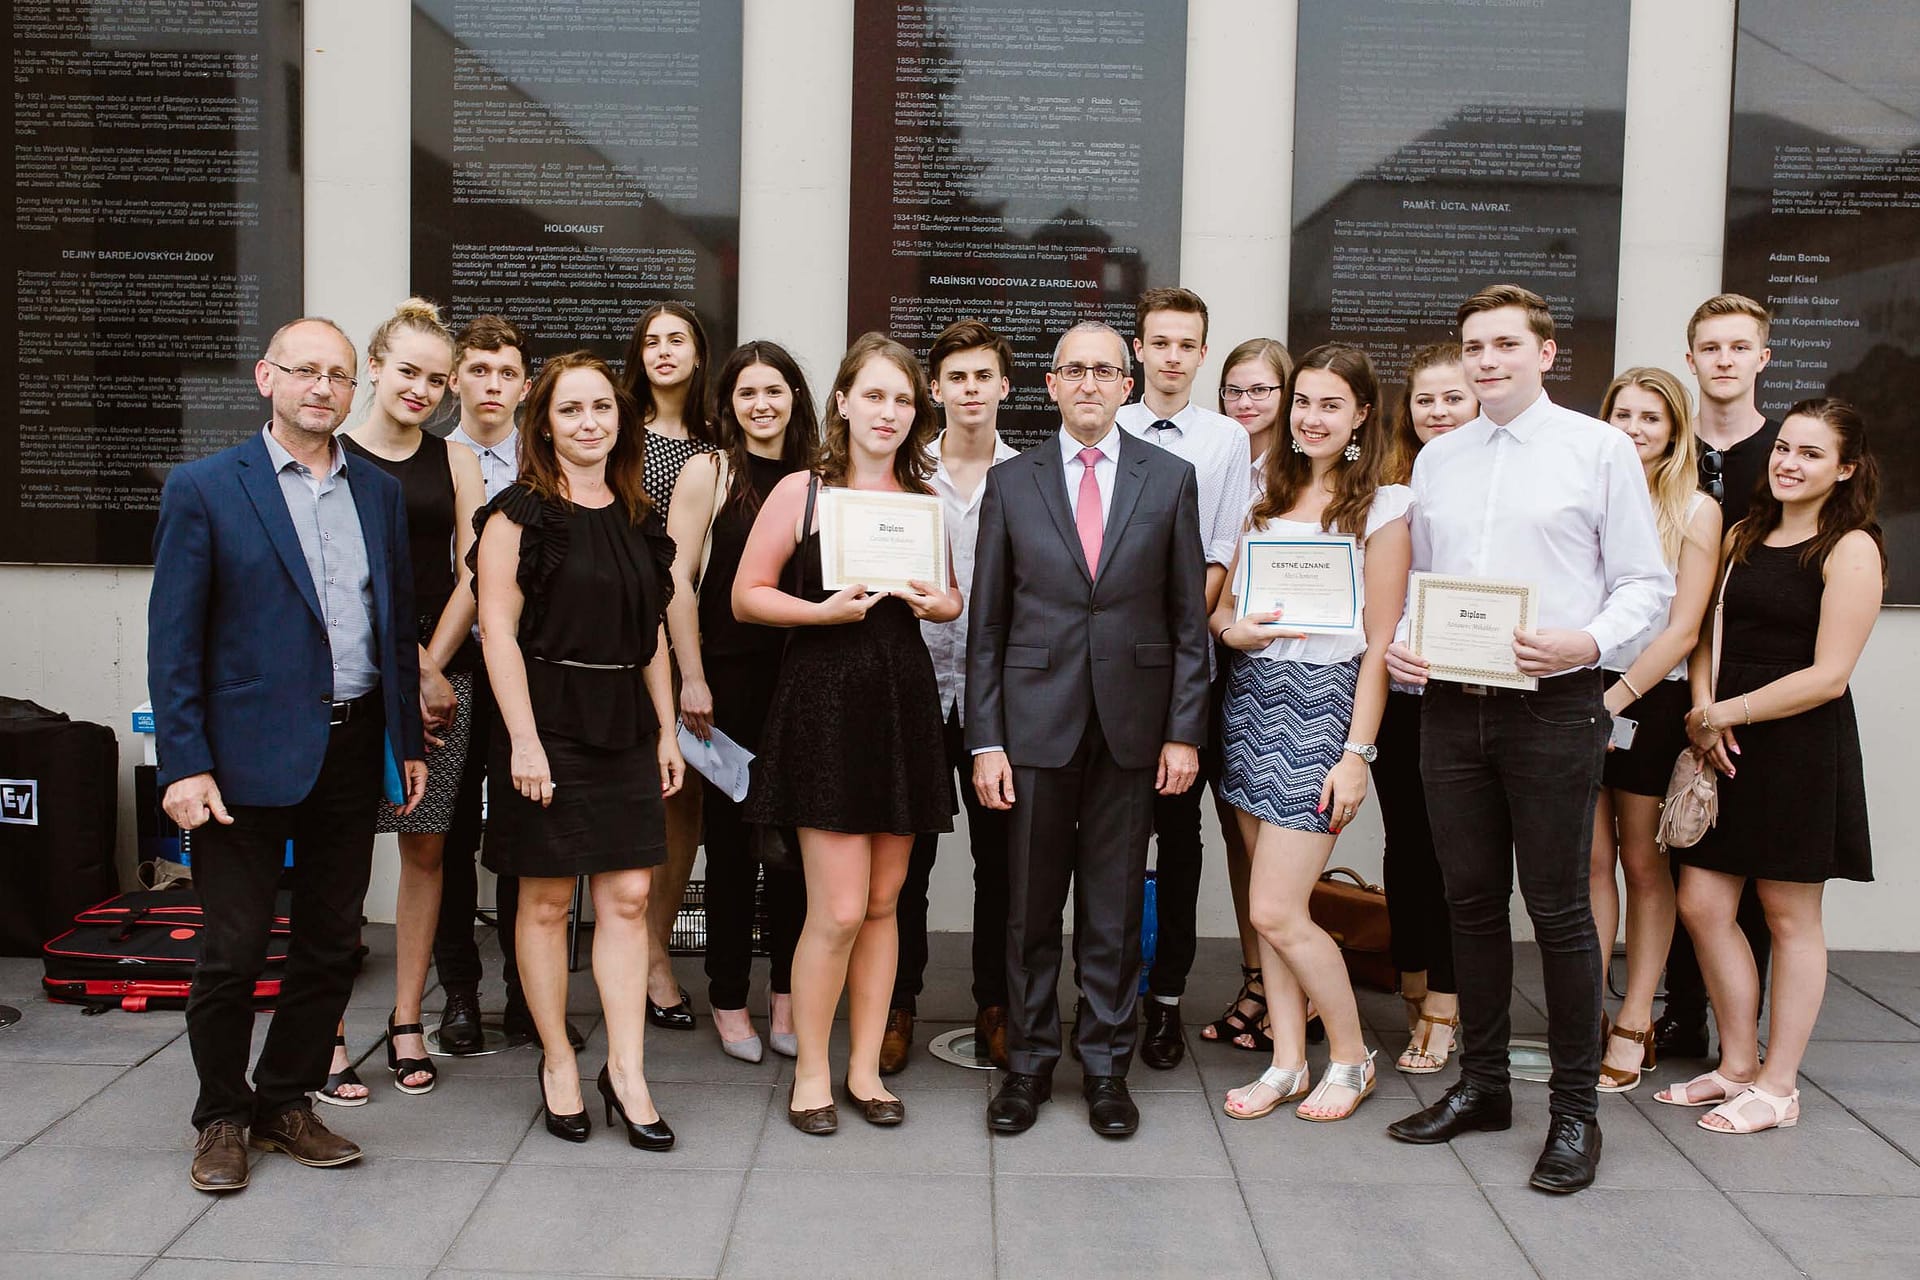 Students and Essay contest participants with H.E. Zvi Aviner Vapni